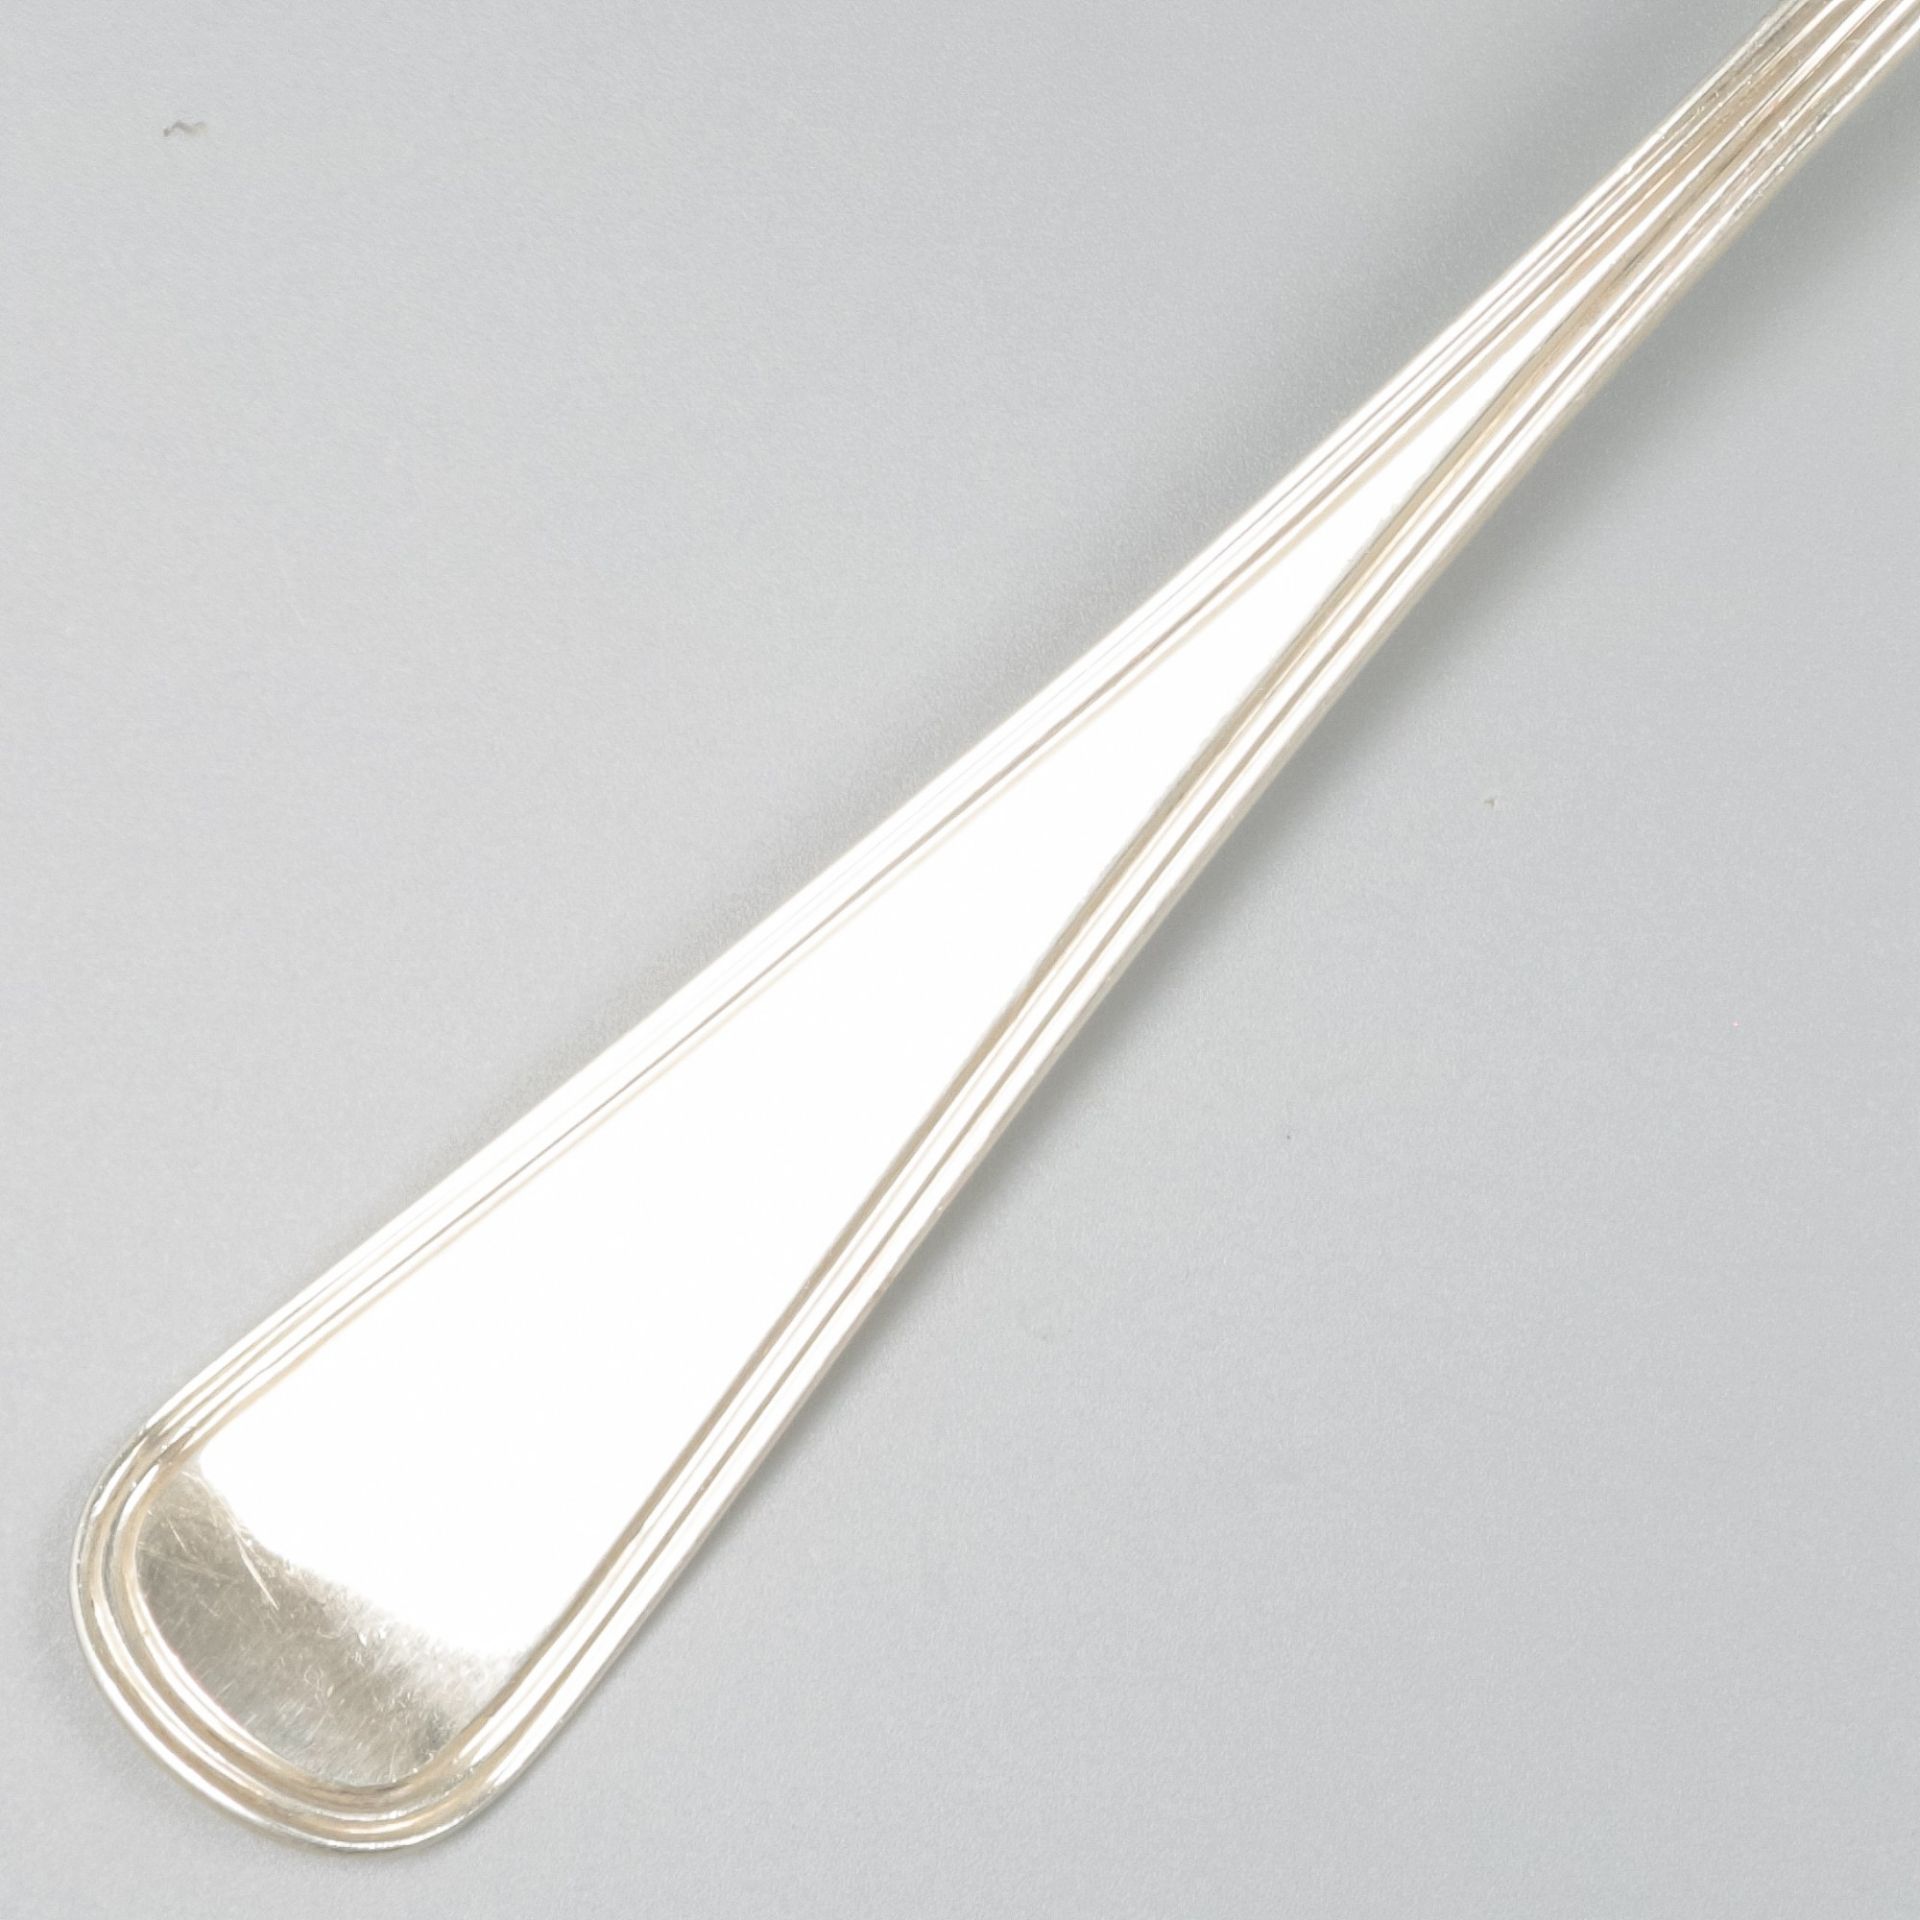 Vegetable serving spoon "Hollands Rondfilet",  silver. - Image 5 of 6